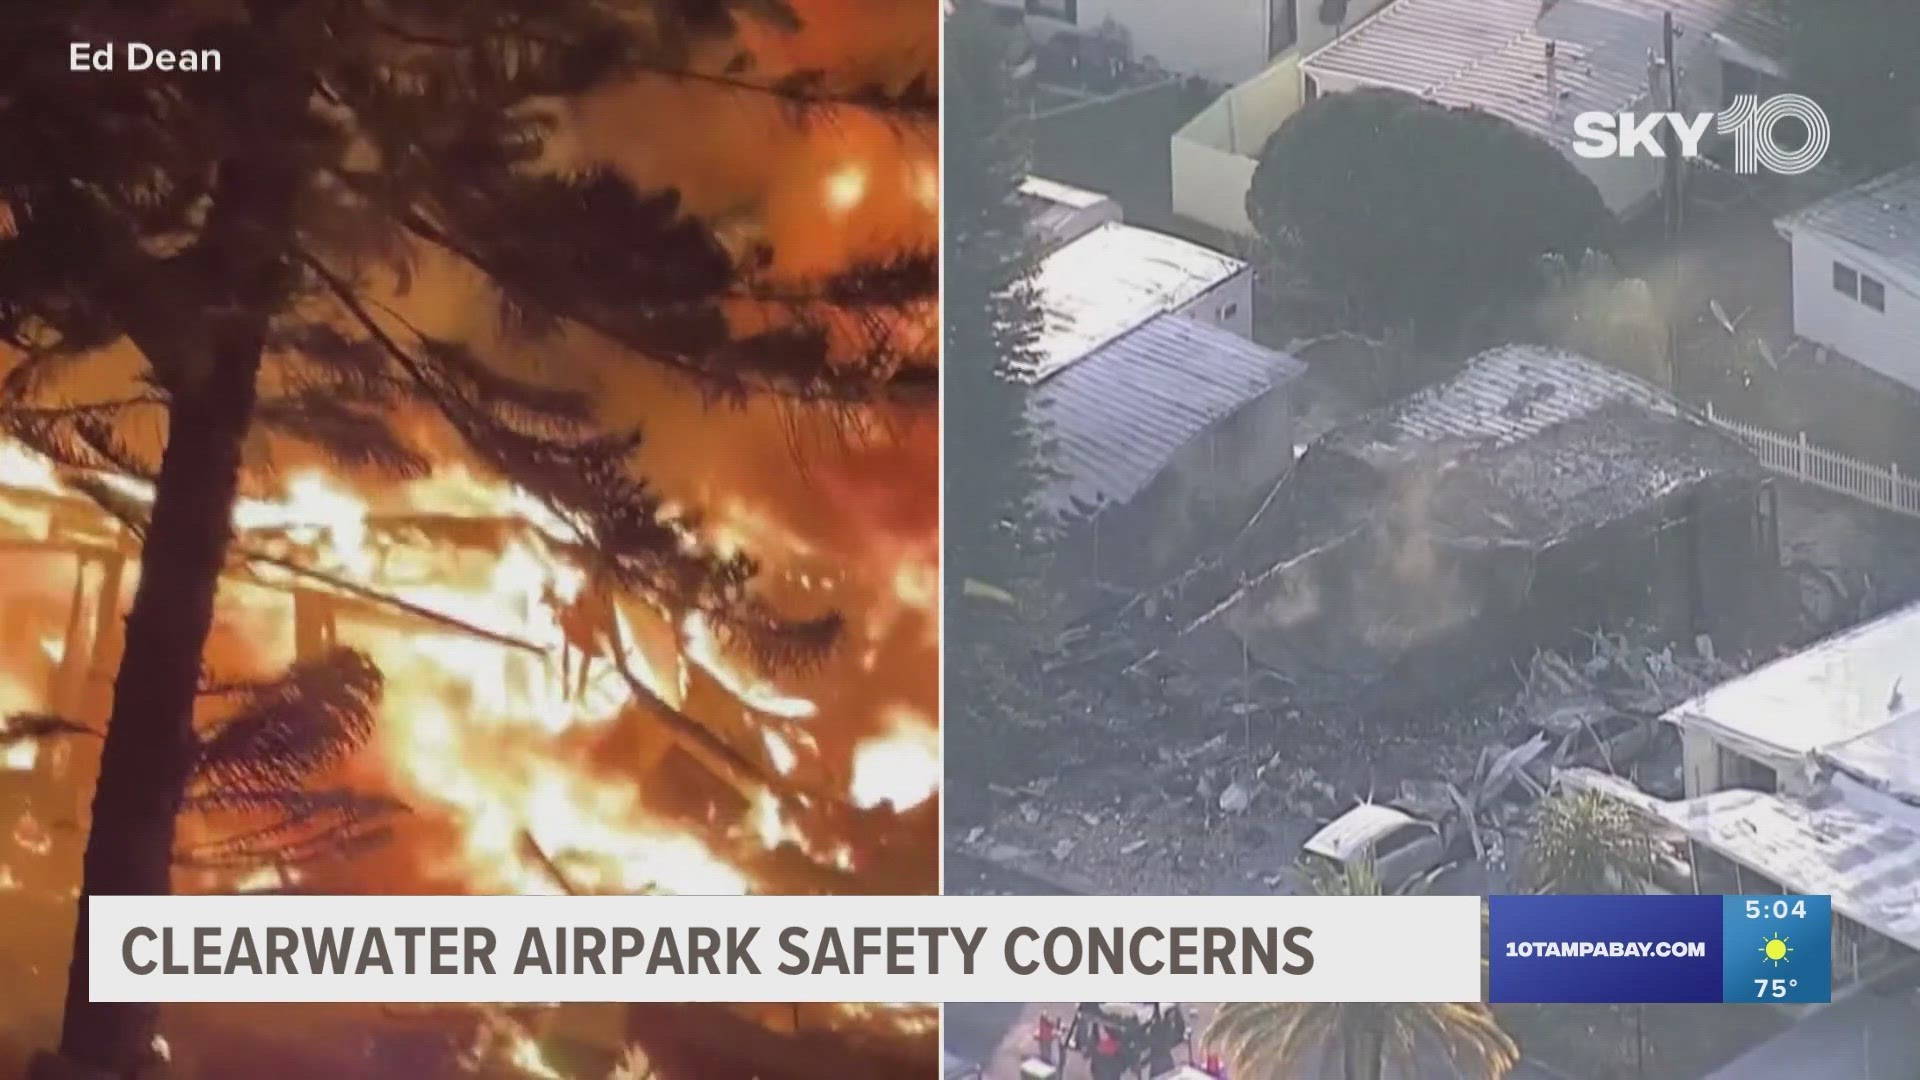 In early February, a pilot crashed into a mobile home neighborhood after repeatedly saying he could not see the runway lights of the Clearwater Airpark.